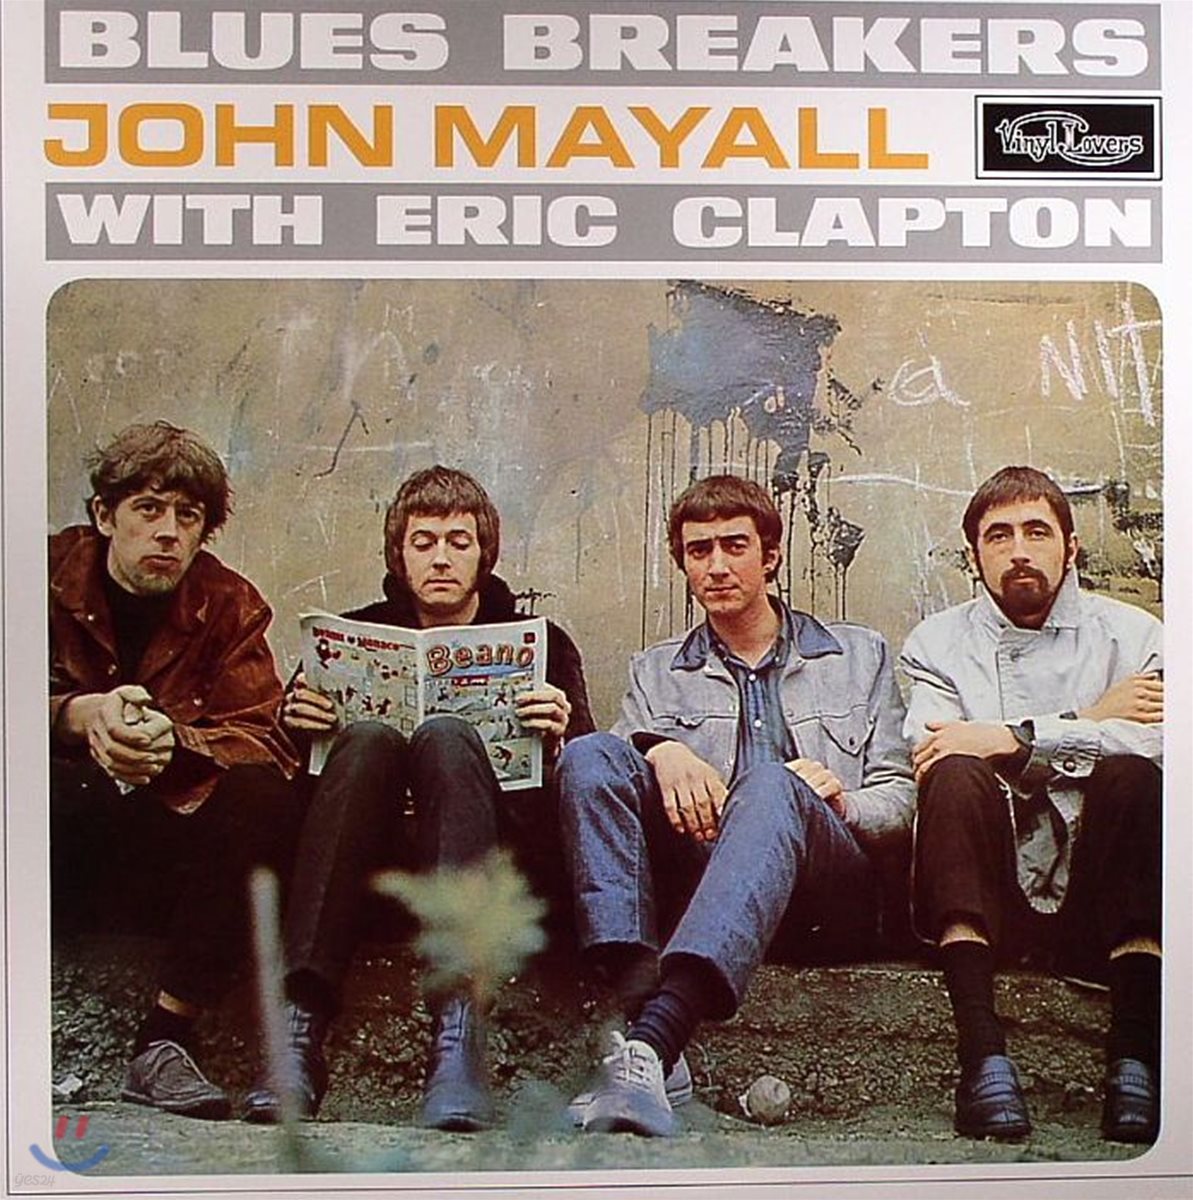 John Mayall & The Blues Breakers - with Eric Clapton [LP]